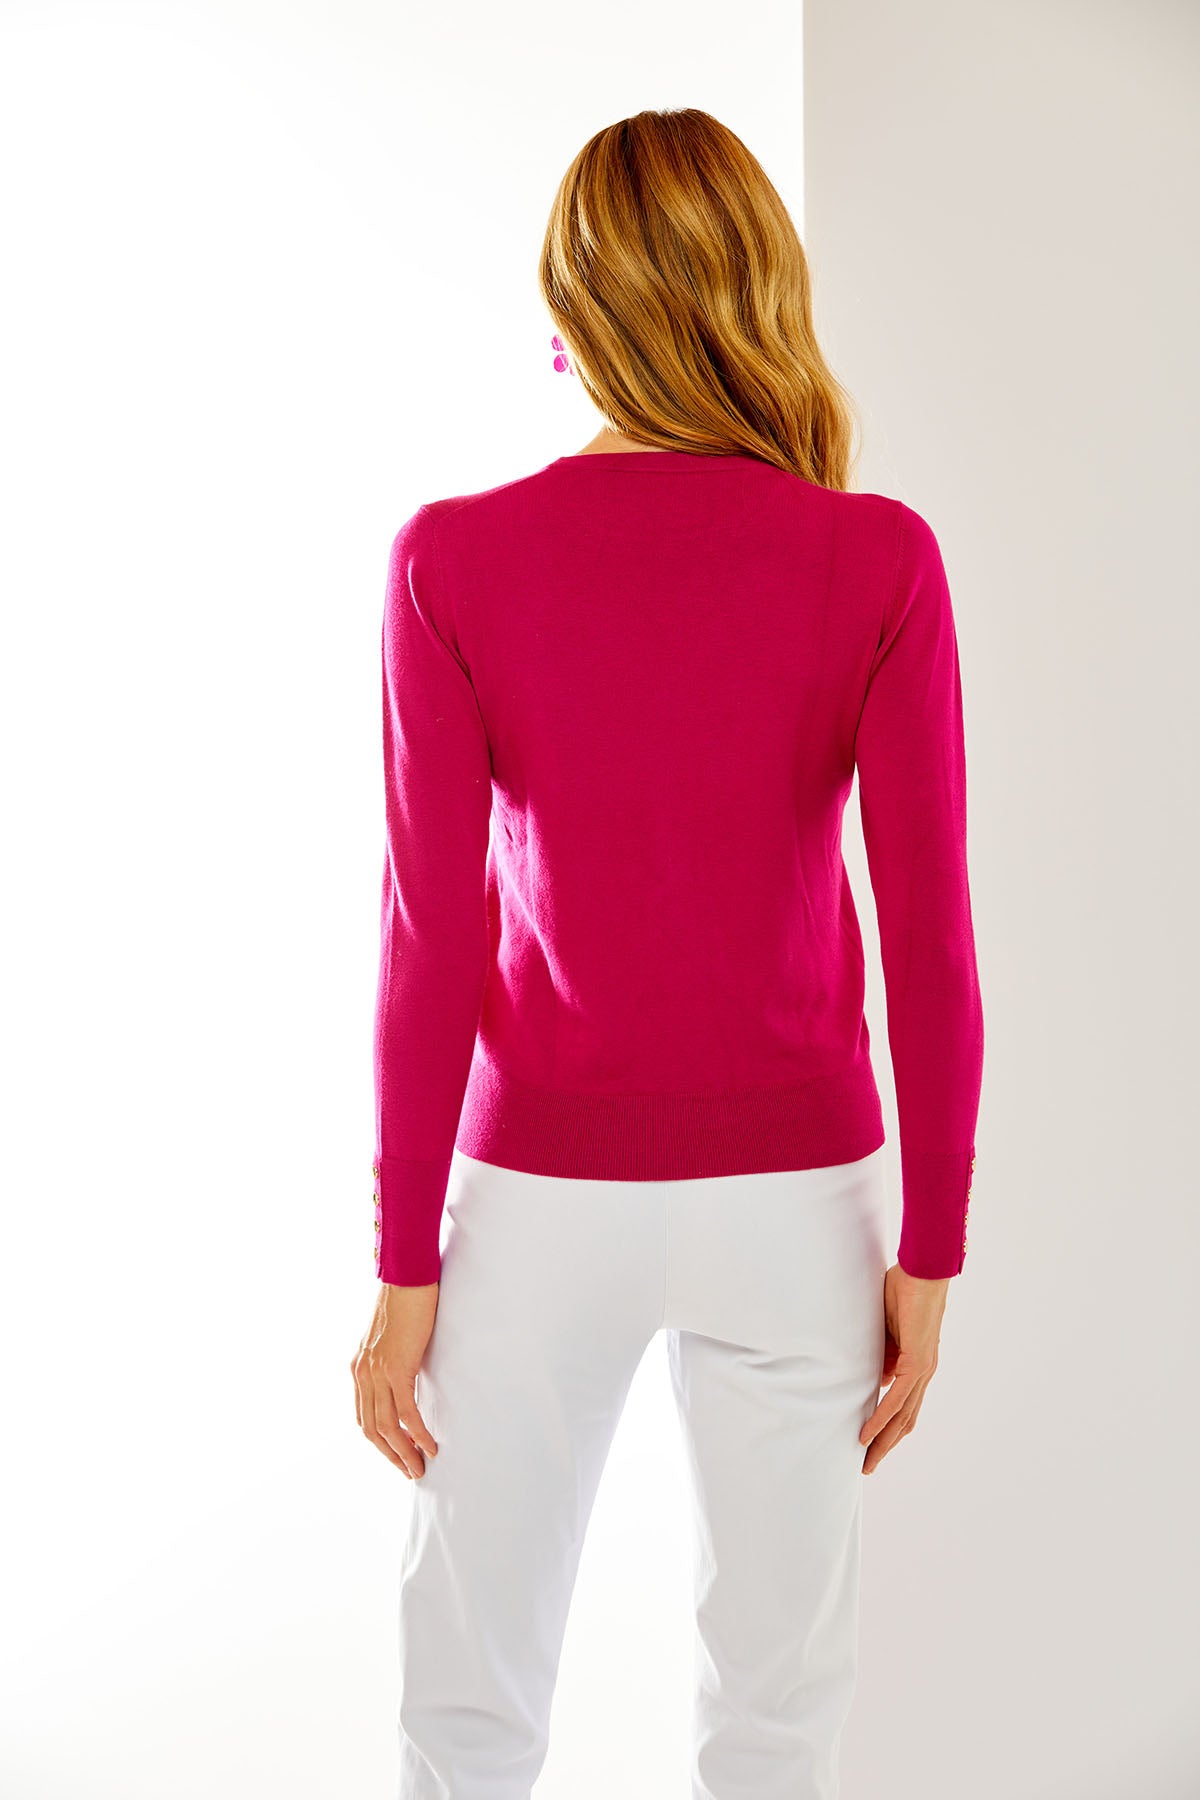 Sara Campbell Crew Neck Pullover With Buttons in Pink / Purple